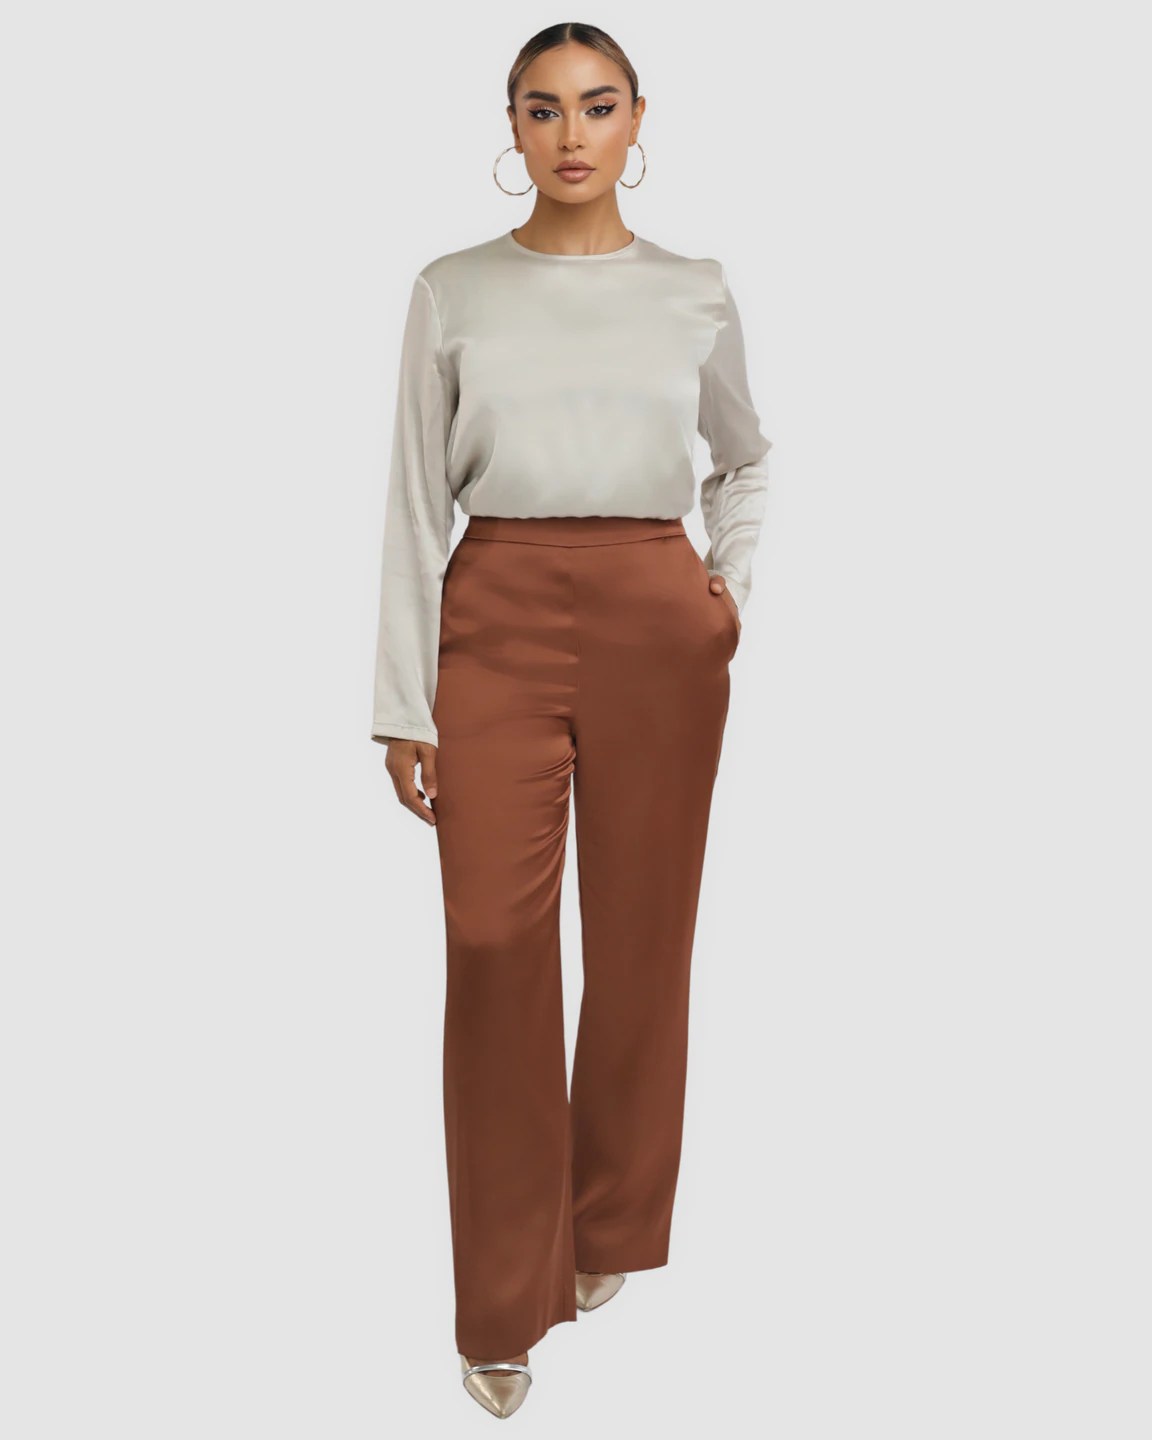 SOIREE PANT - TOFFEE - Leela Rose Boutique